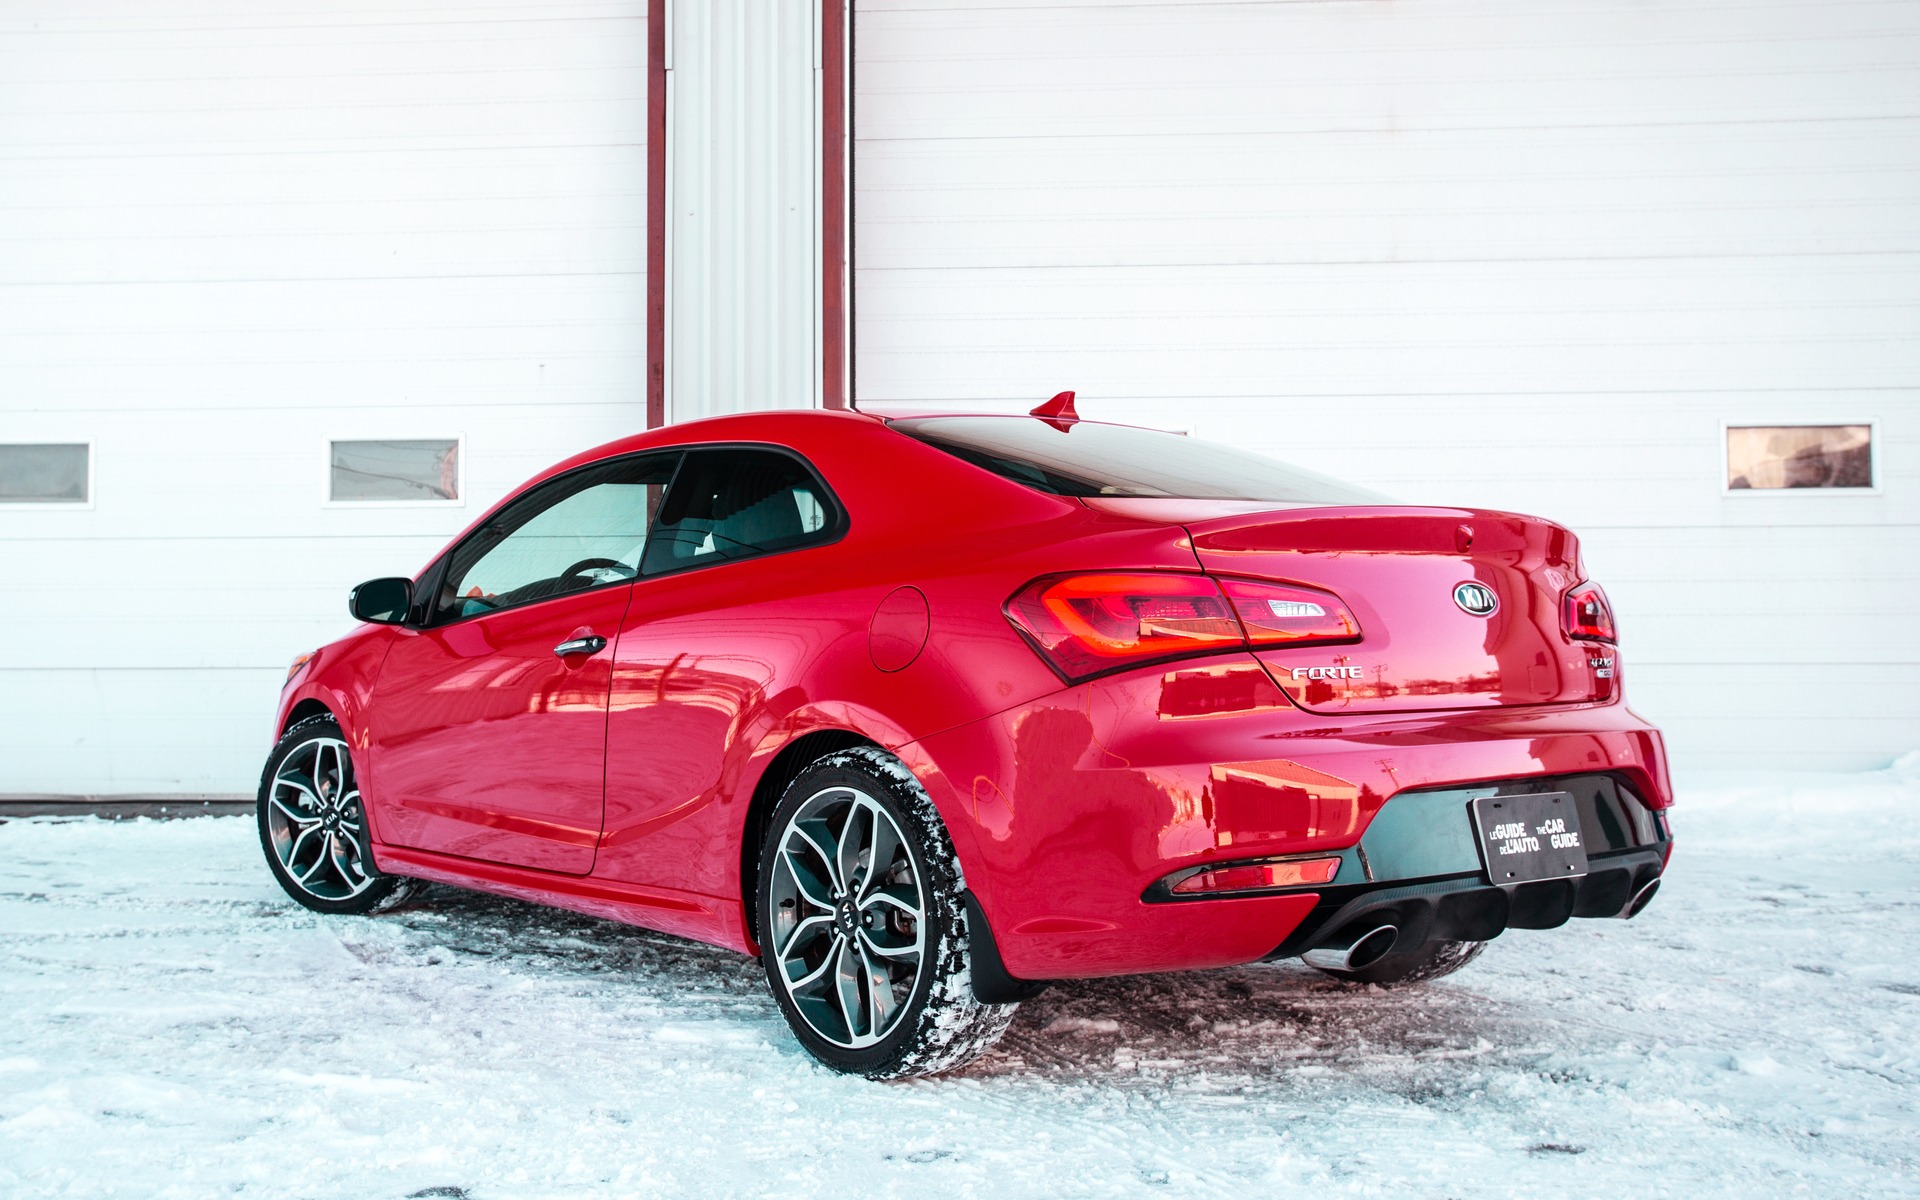 The Forte Koup SX sports some sweet 18-inch wheels and a dual exhaust.